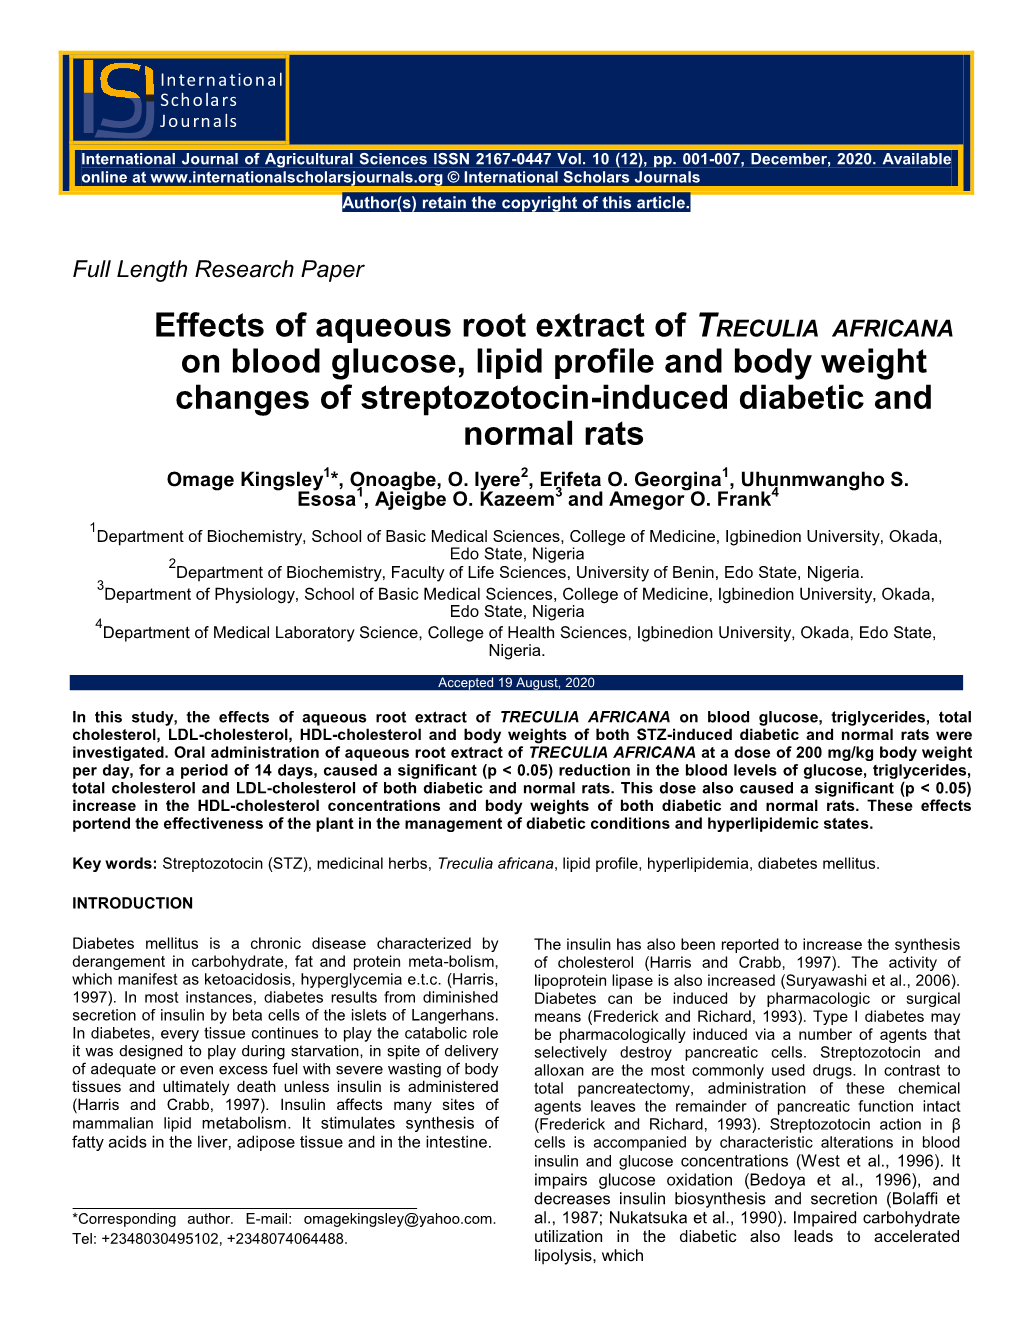 Effects of Aqueous Root Extract of TRECULIA AFRICANA on Blood Glucose, Lipid Profile and Body Weight Changes of Streptozotocin-Induced Diabetic and Normal Rats